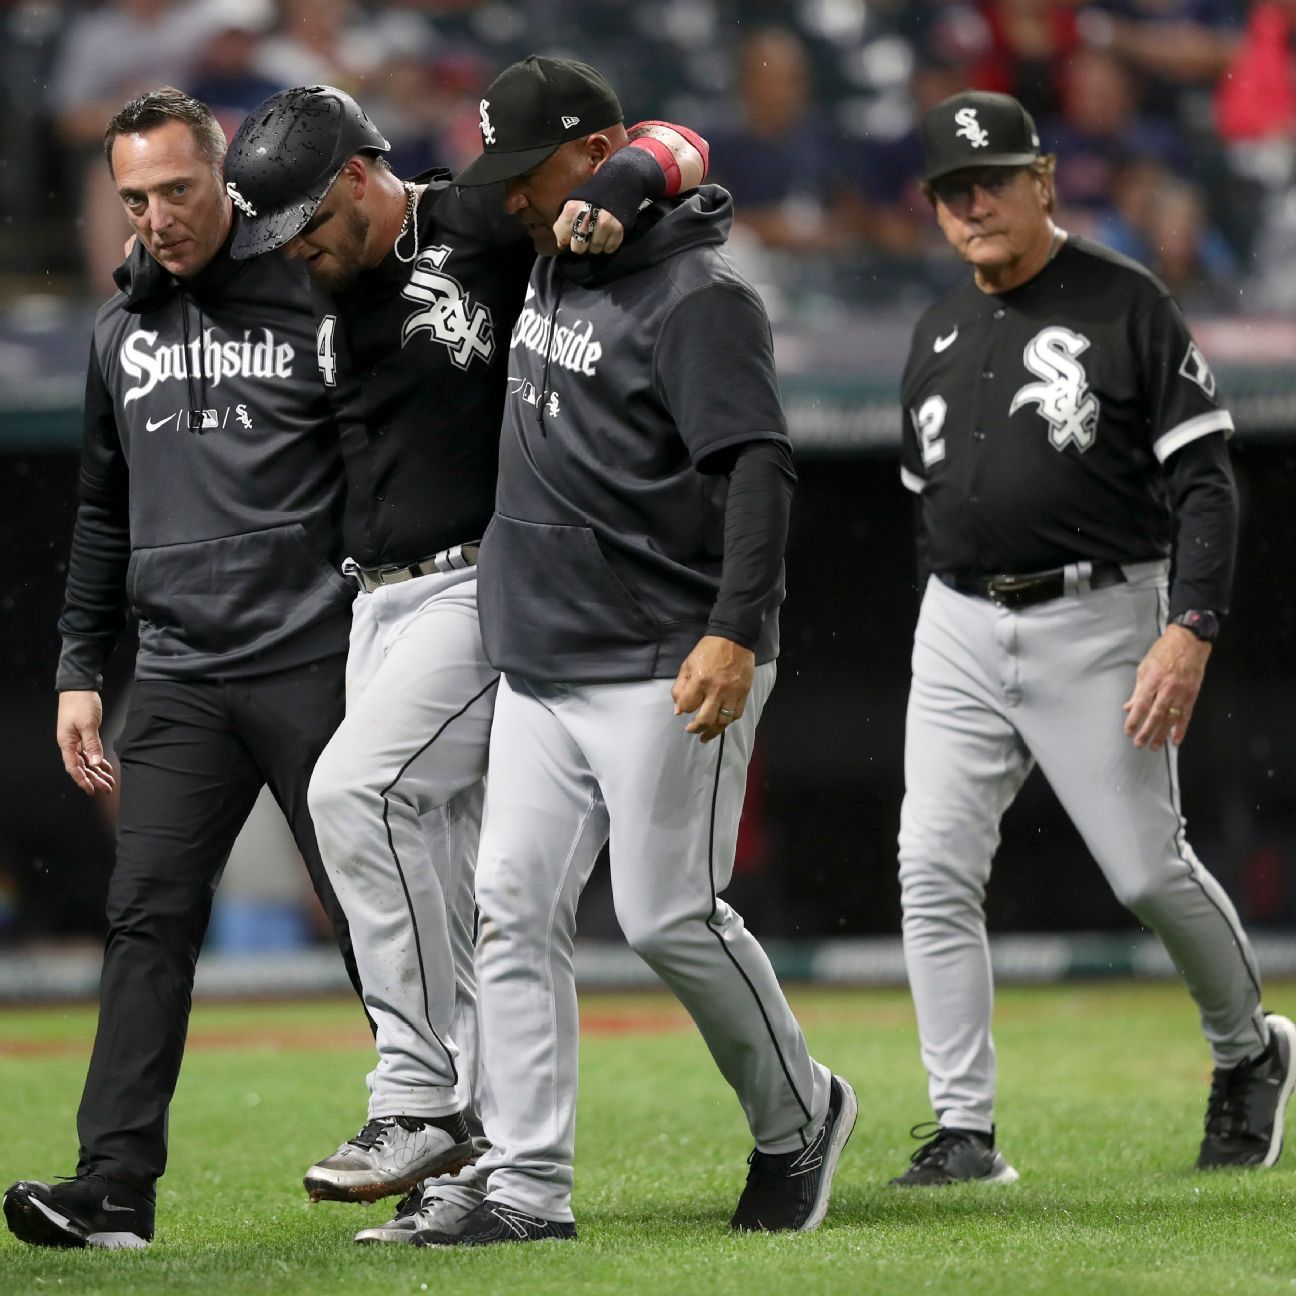 White Sox catcher Grandal to IL with knee injury